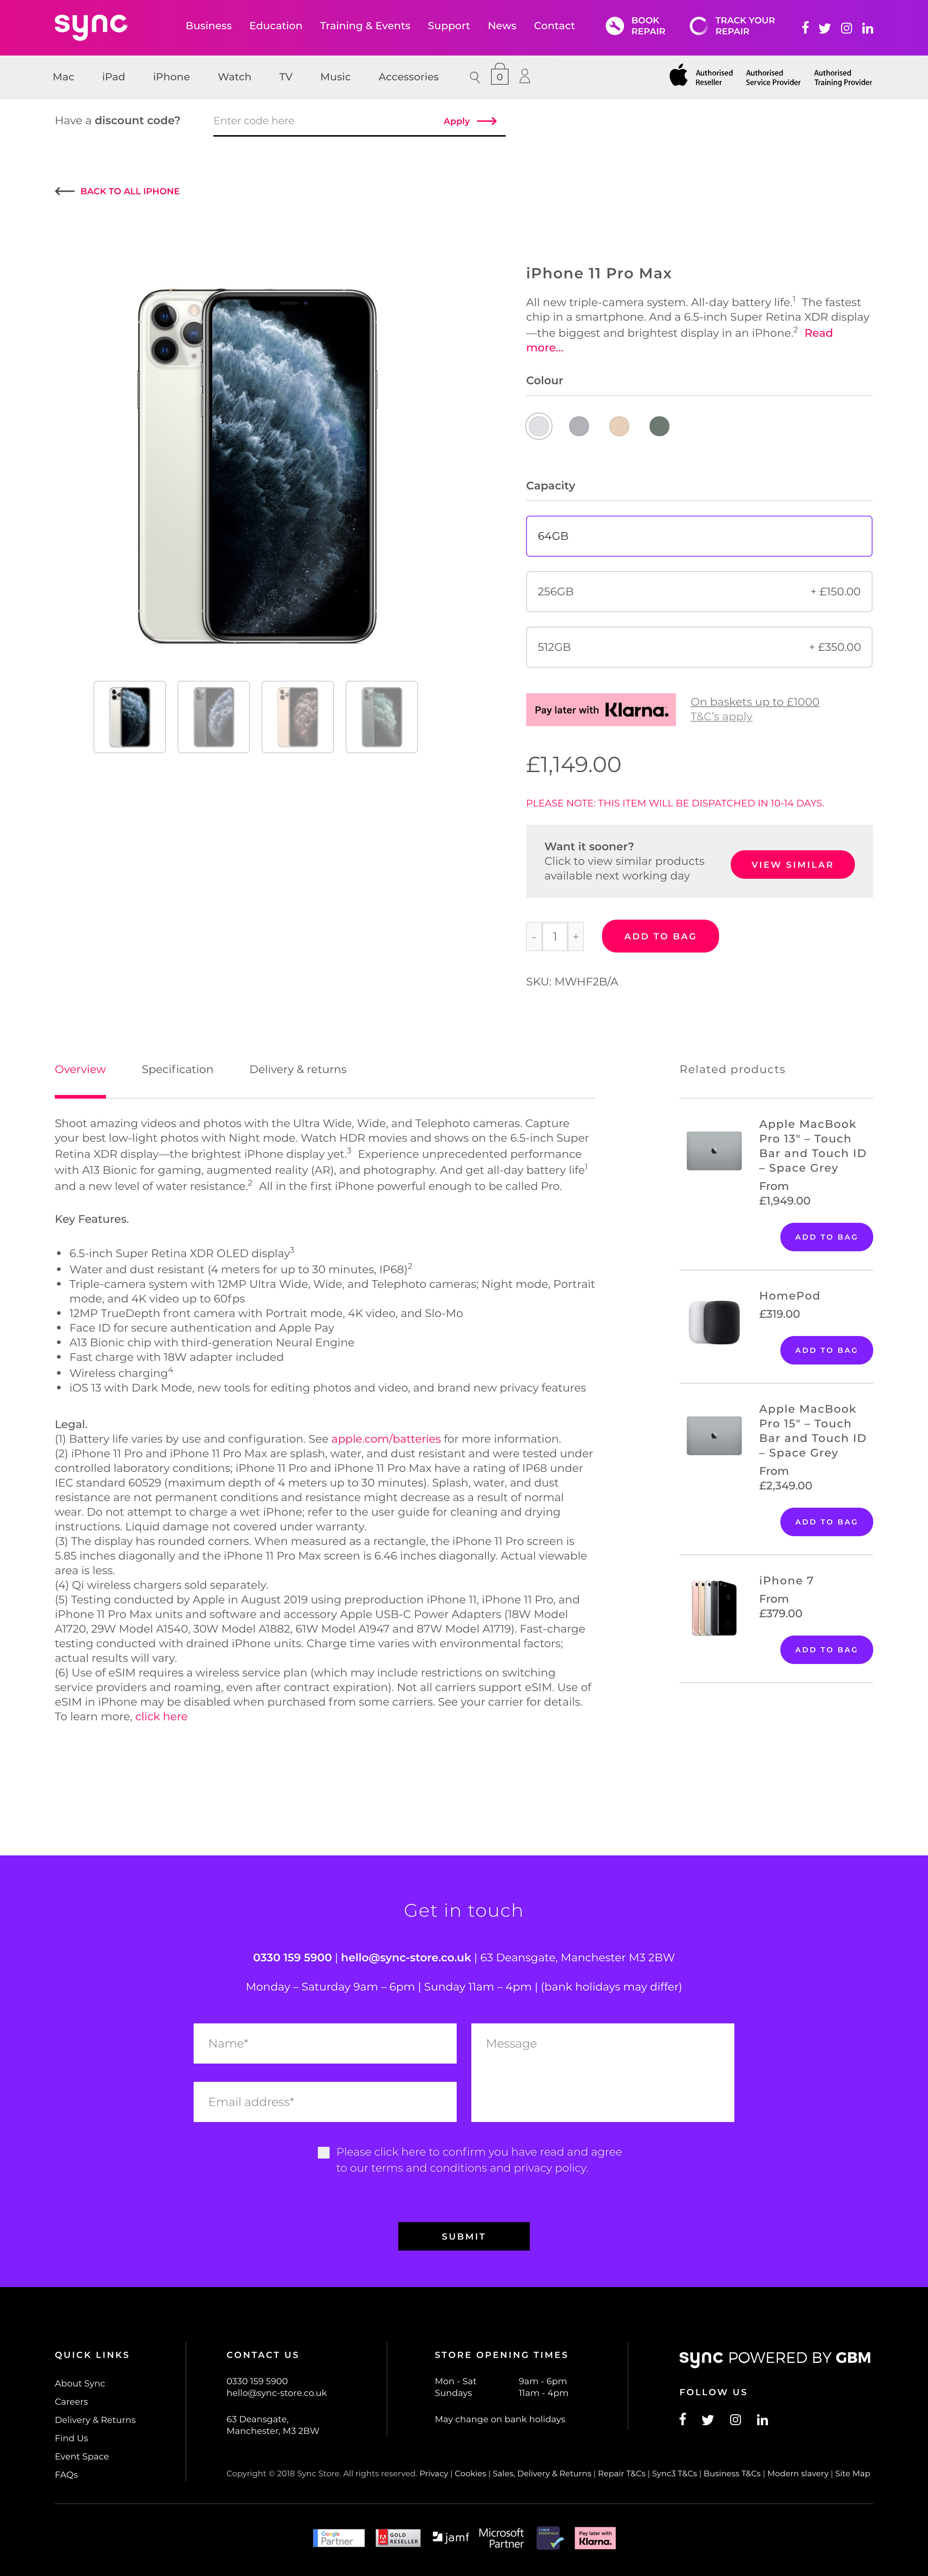 sync store product page